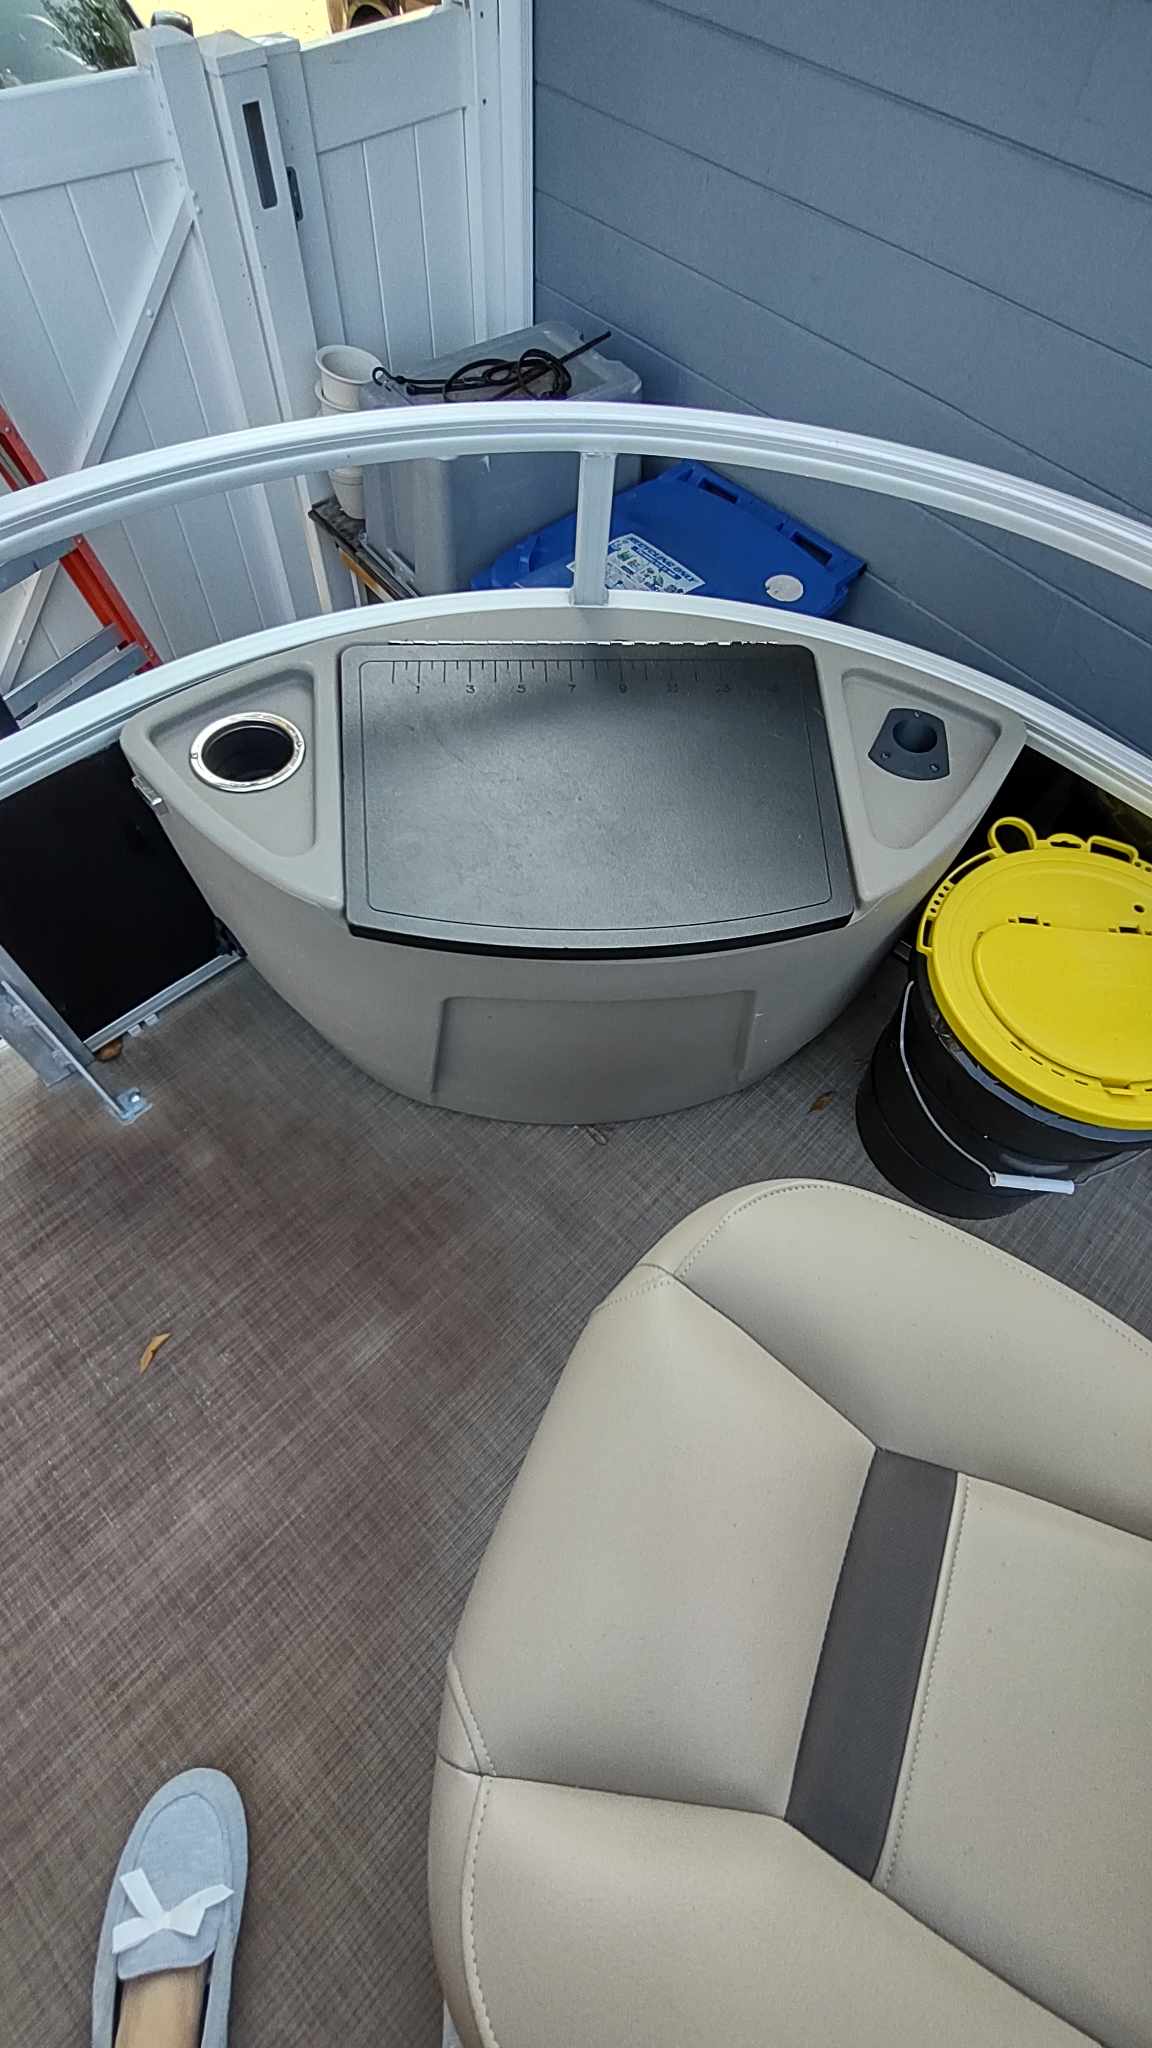 2020 Sun Tracker Fishin' Barge 22 DLX Fishing boat for sale in St Petersburg, FL - image 19 